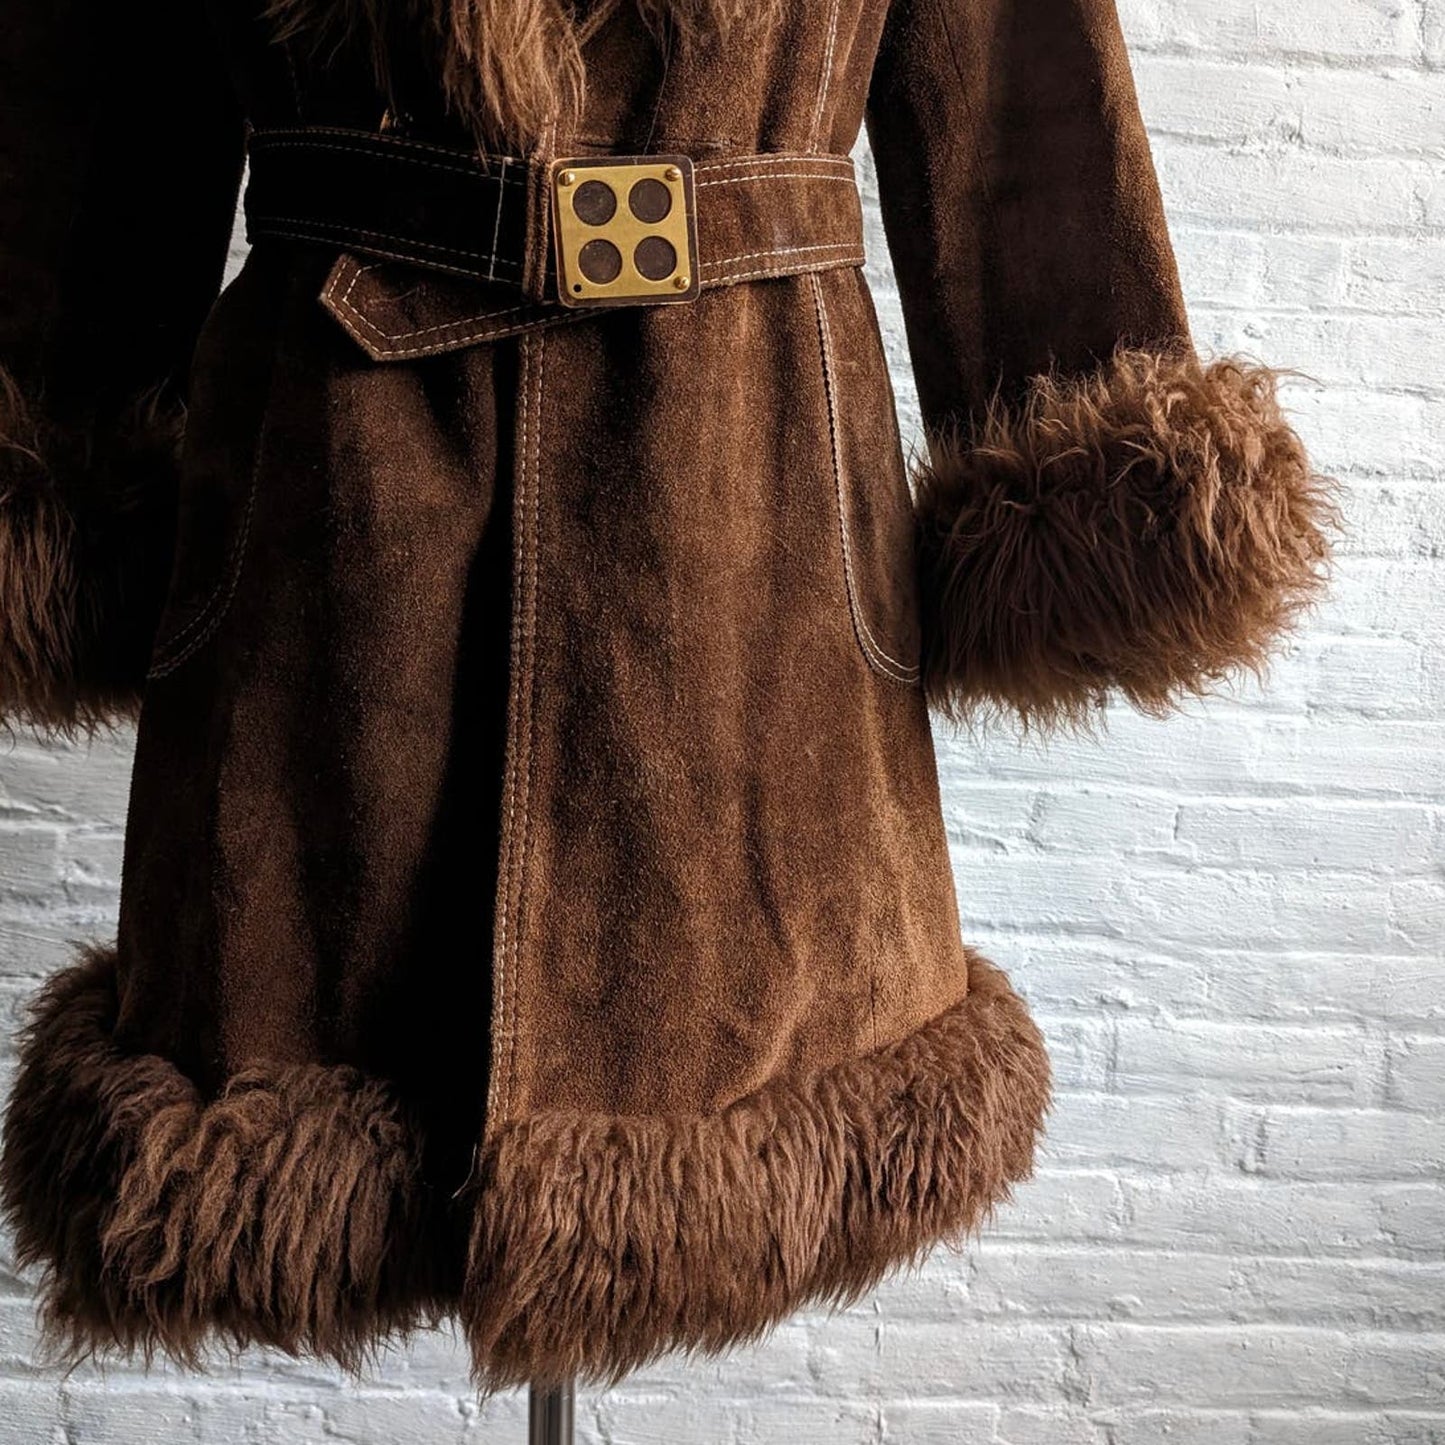 Vintage Penny Lane Fur Furry Genuine Suede Leather Groovy Mod Trench Coat Jacket